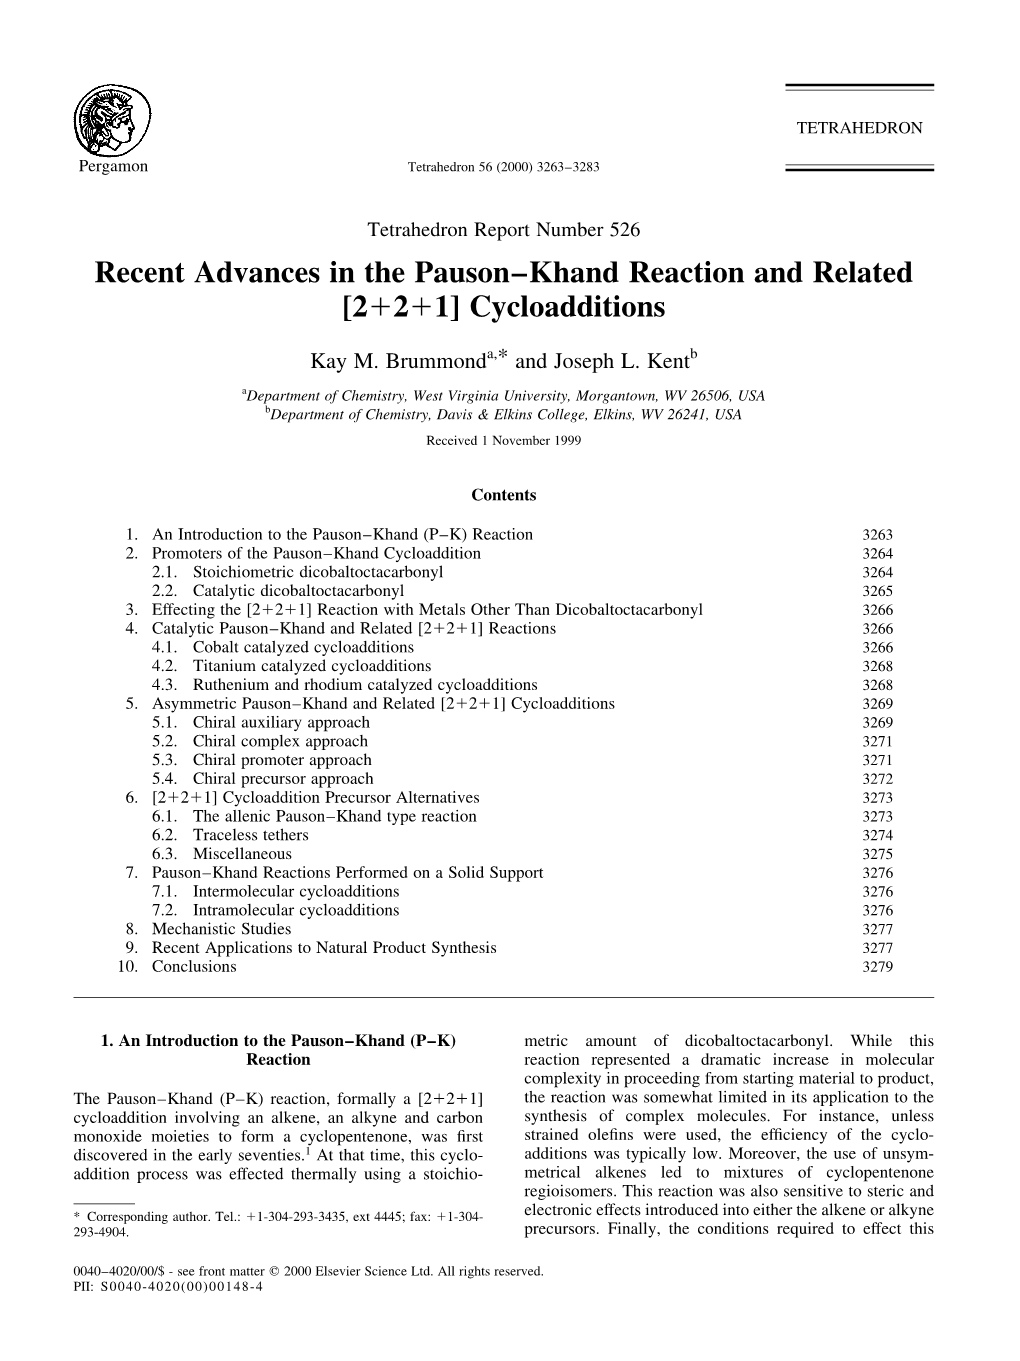 Recent Advances in the Pauson±Khand Reaction and Related [21211] Cycloadditions